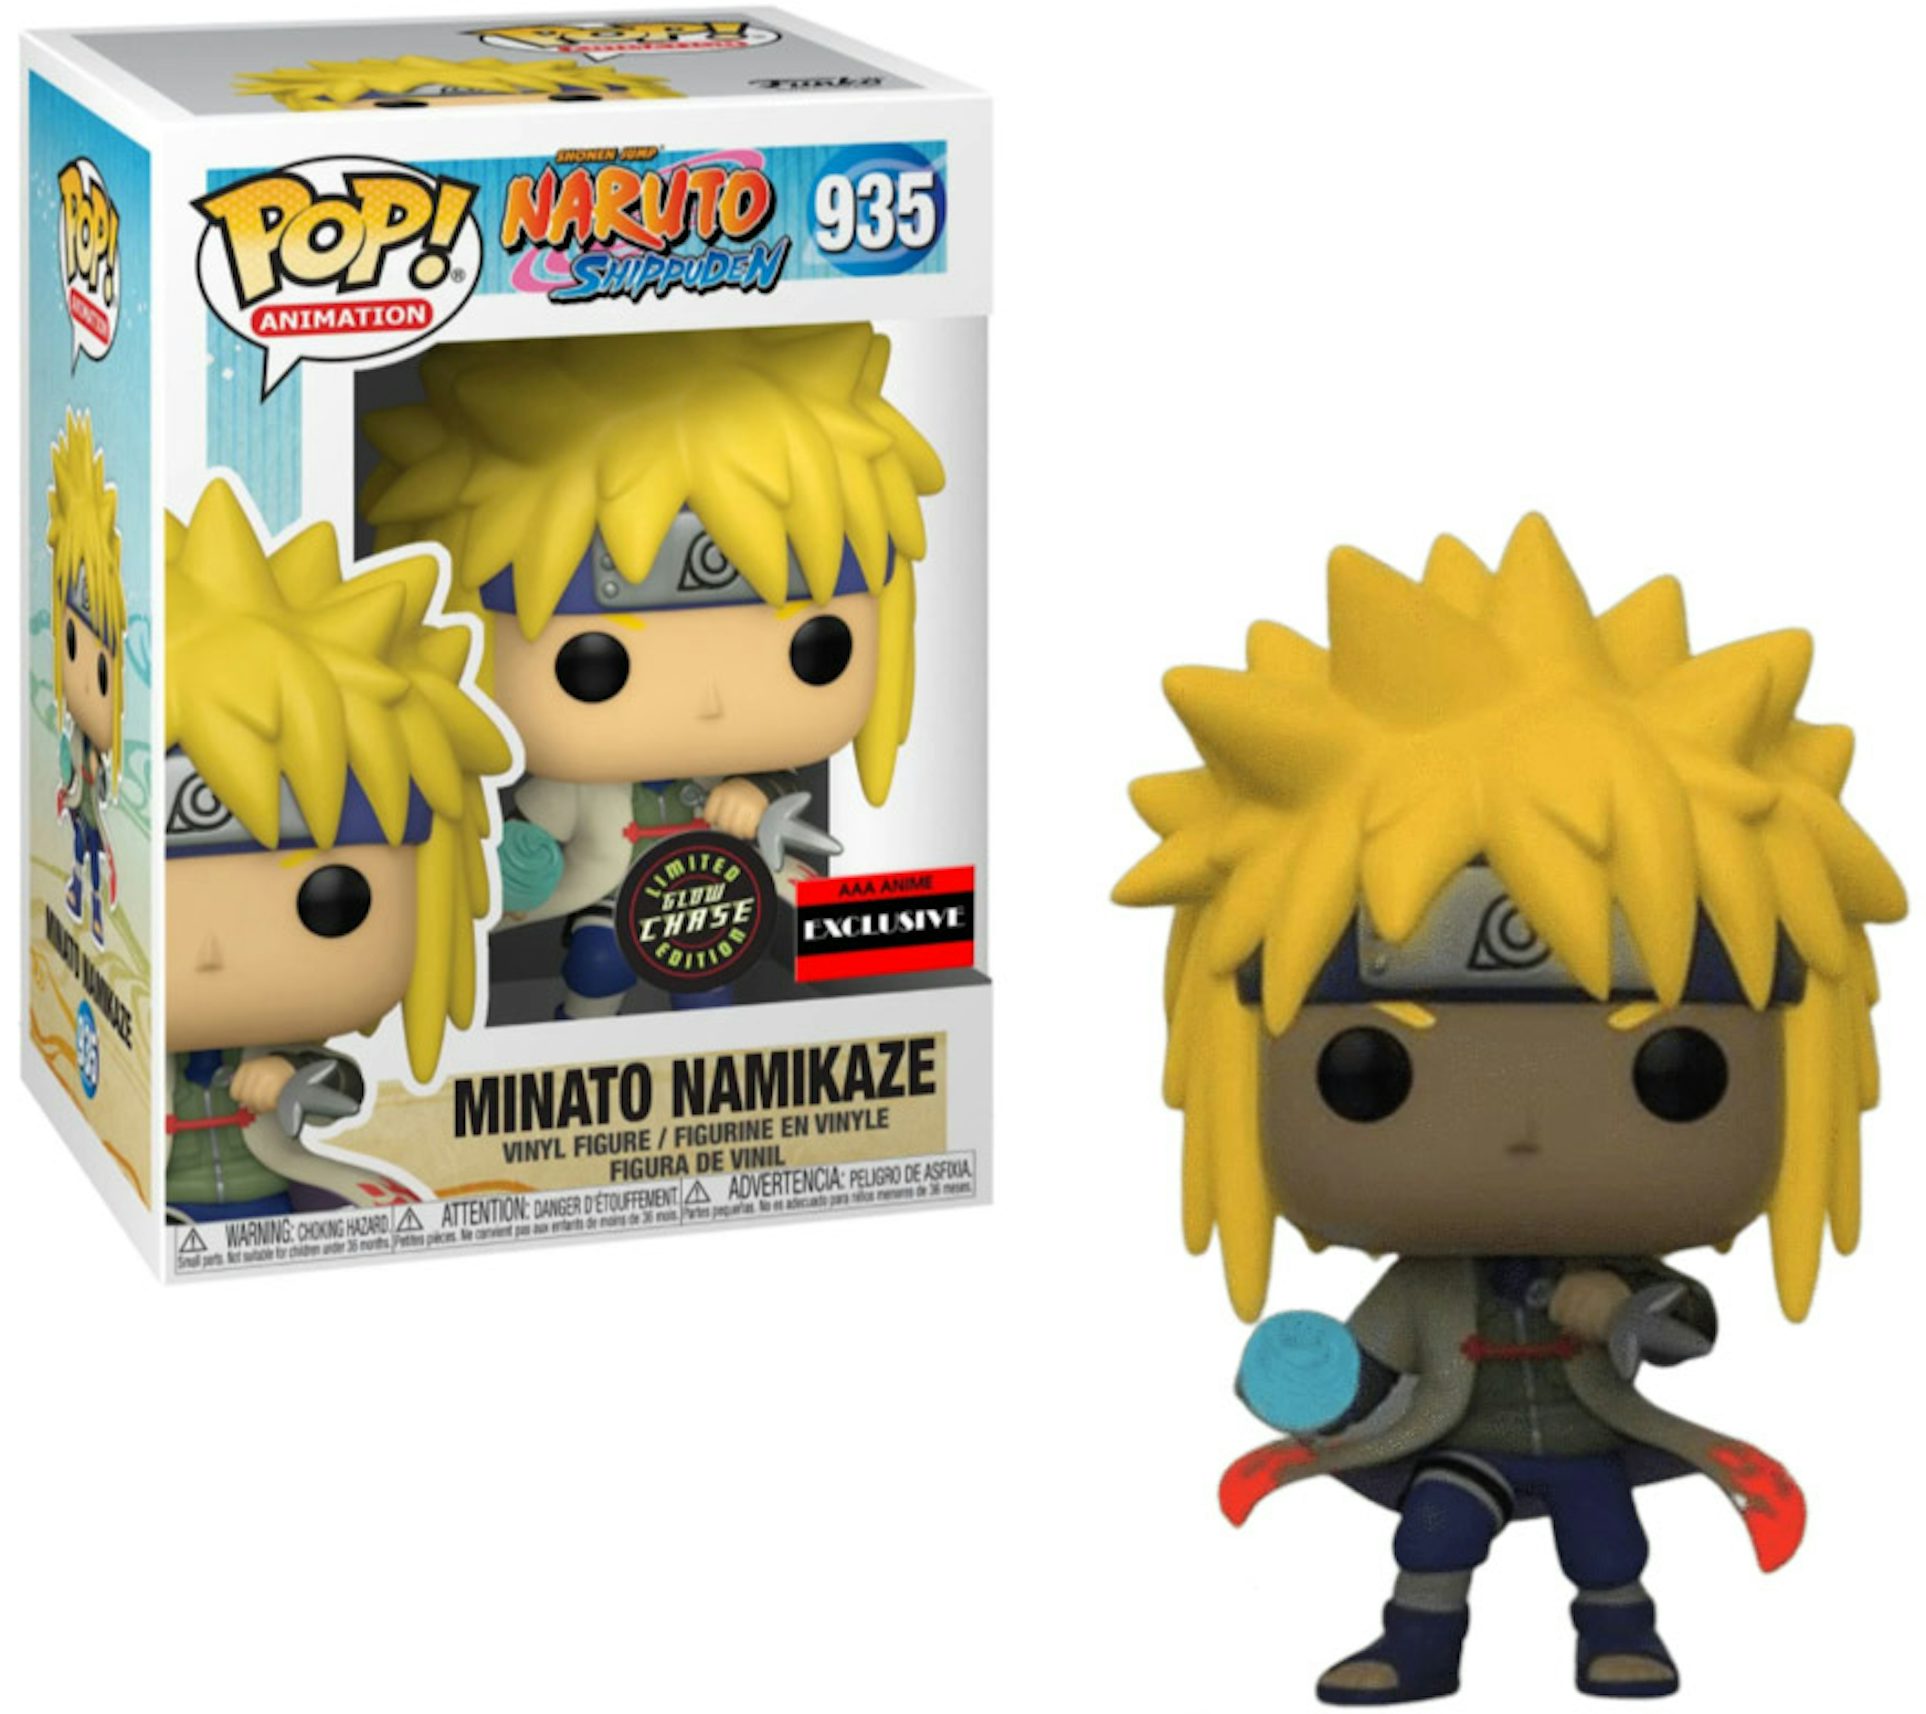 https://images.stockx.com/images/Funko-Pop-Animation-Naruto-Shippuden-Minato-Namikaze-GITD-Chase-AAA-Anime-Exclusive-Figure-935.jpg?fit=fill&bg=FFFFFF&w=1200&h=857&fm=jpg&auto=compress&dpr=2&trim=color&updated_at=1628315224&q=60